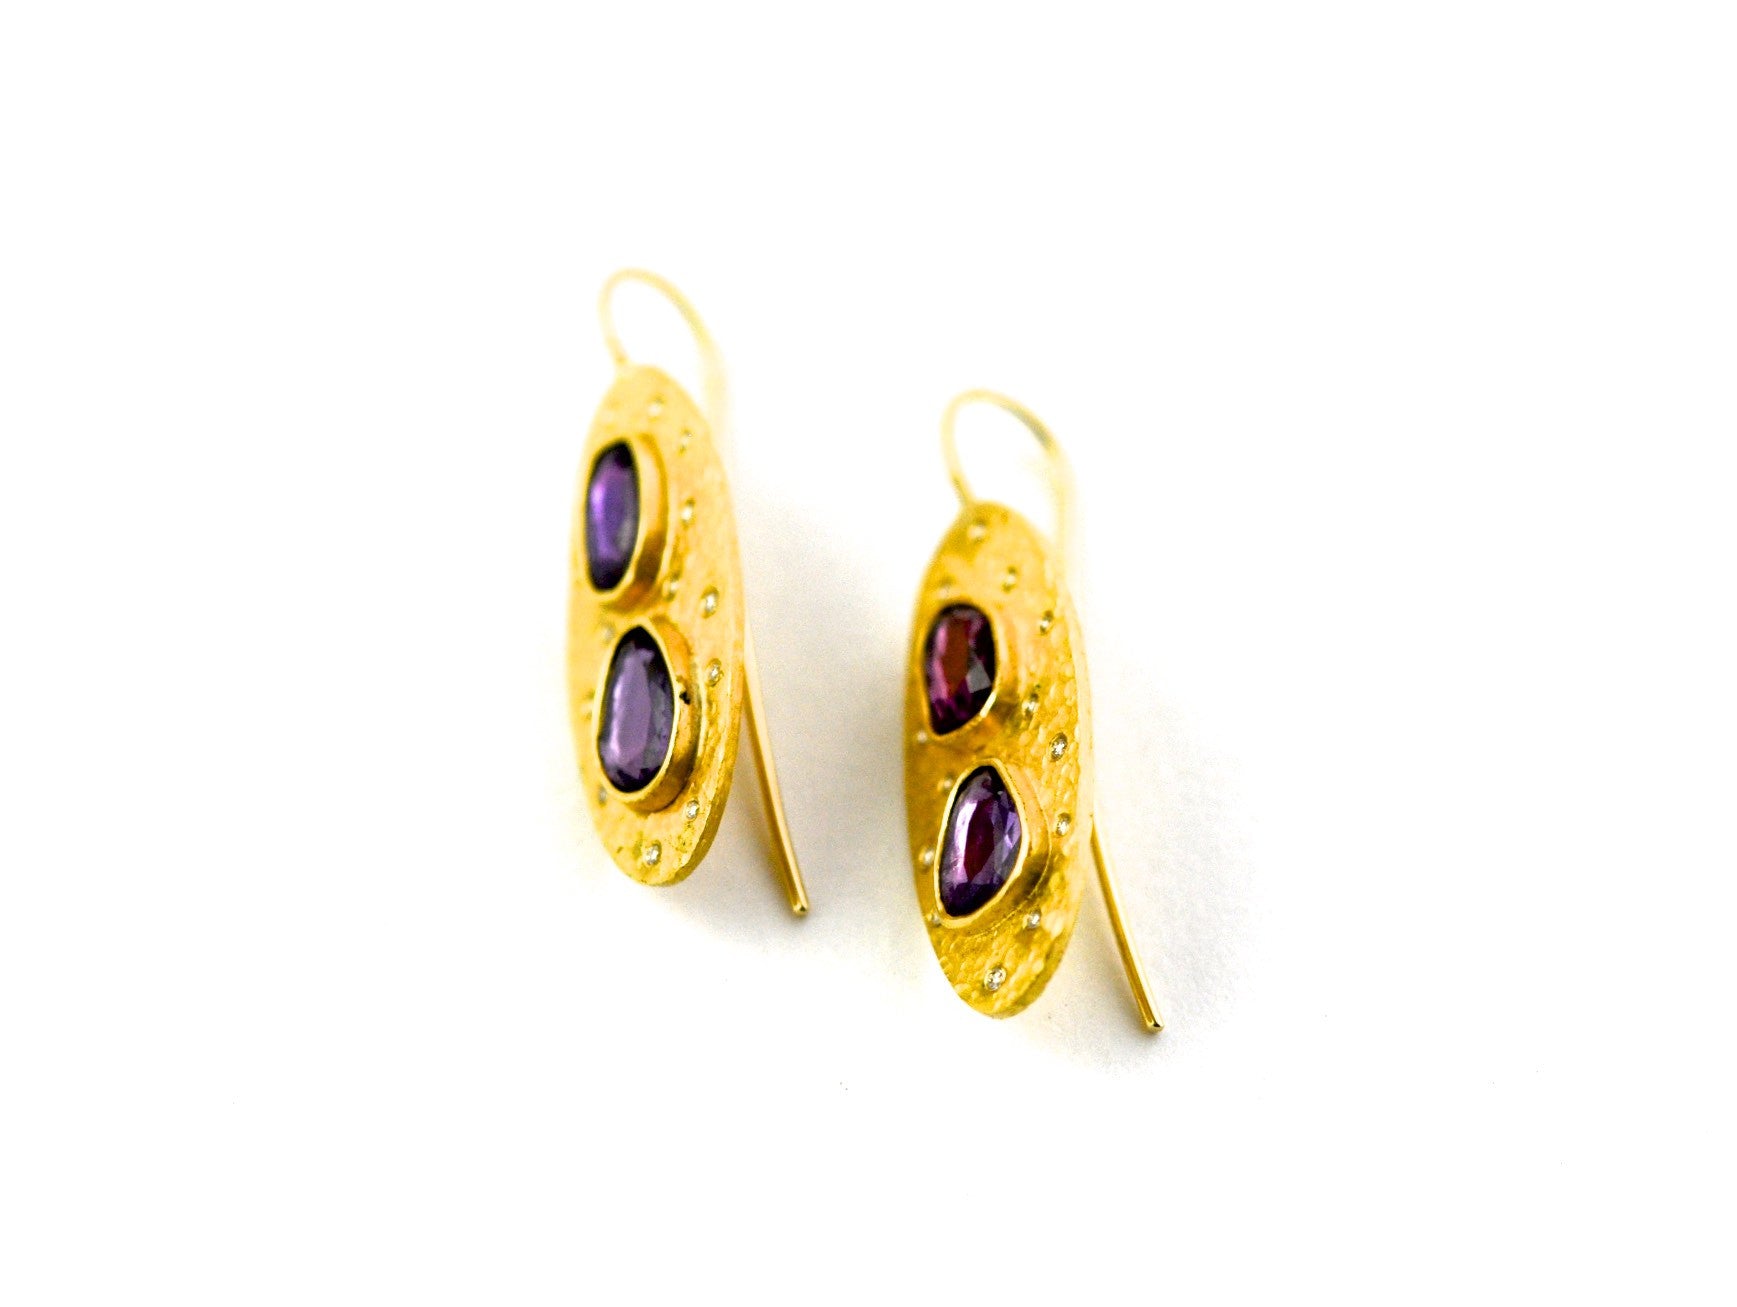 earrings / gold hammered 22k + rose cut sapphires